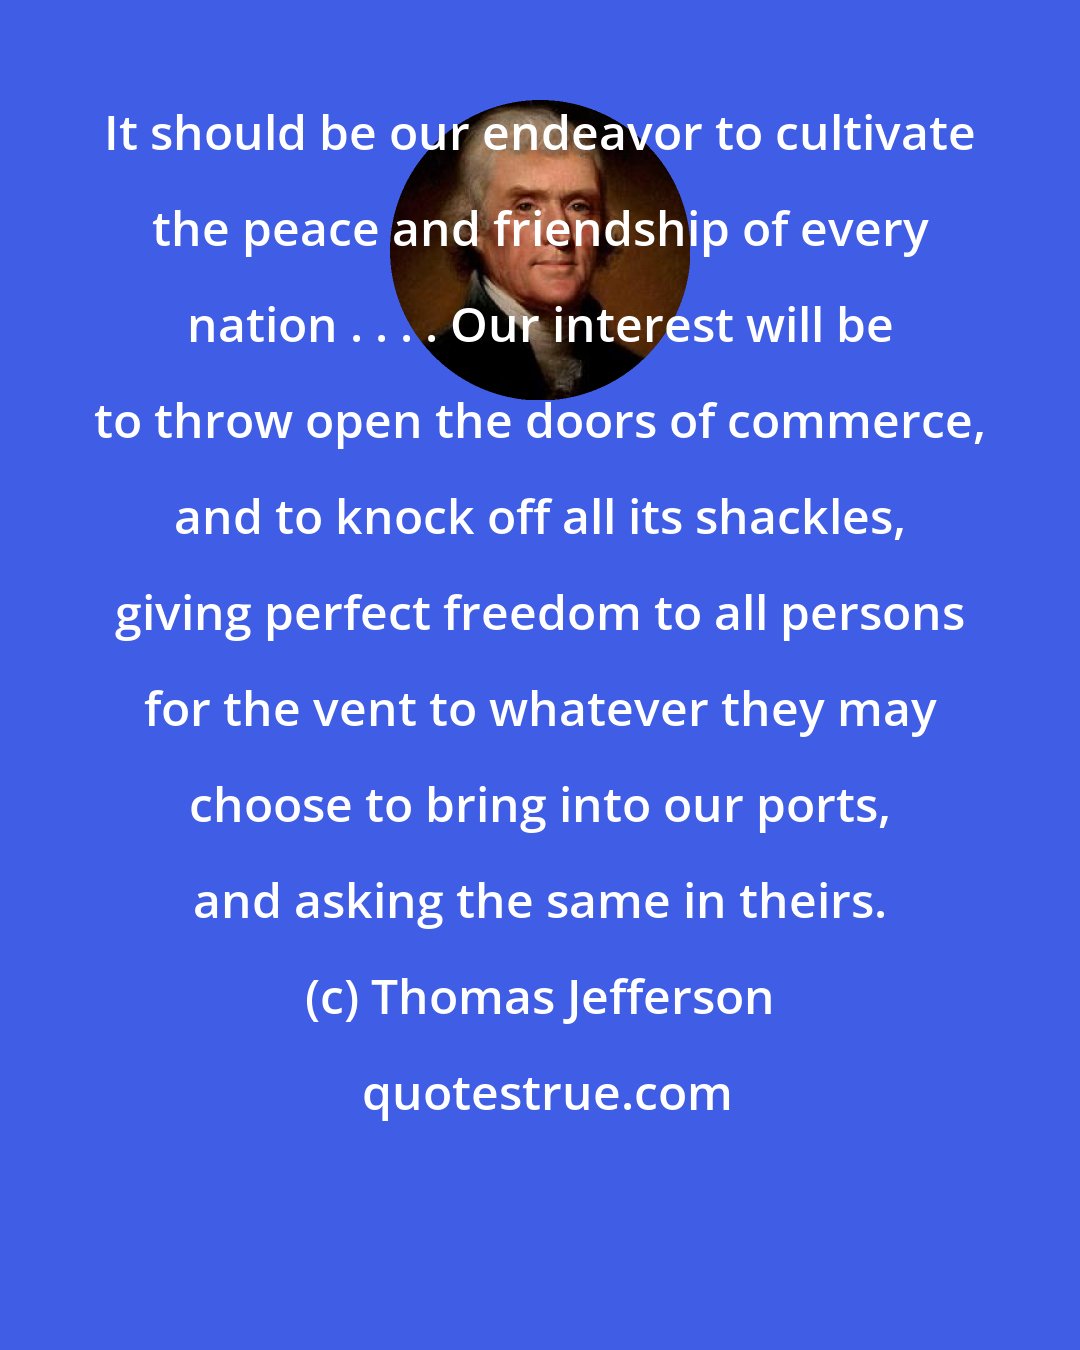 Thomas Jefferson: It should be our endeavor to cultivate the peace and friendship of every nation . . . . Our interest will be to throw open the doors of commerce, and to knock off all its shackles, giving perfect freedom to all persons for the vent to whatever they may choose to bring into our ports, and asking the same in theirs.